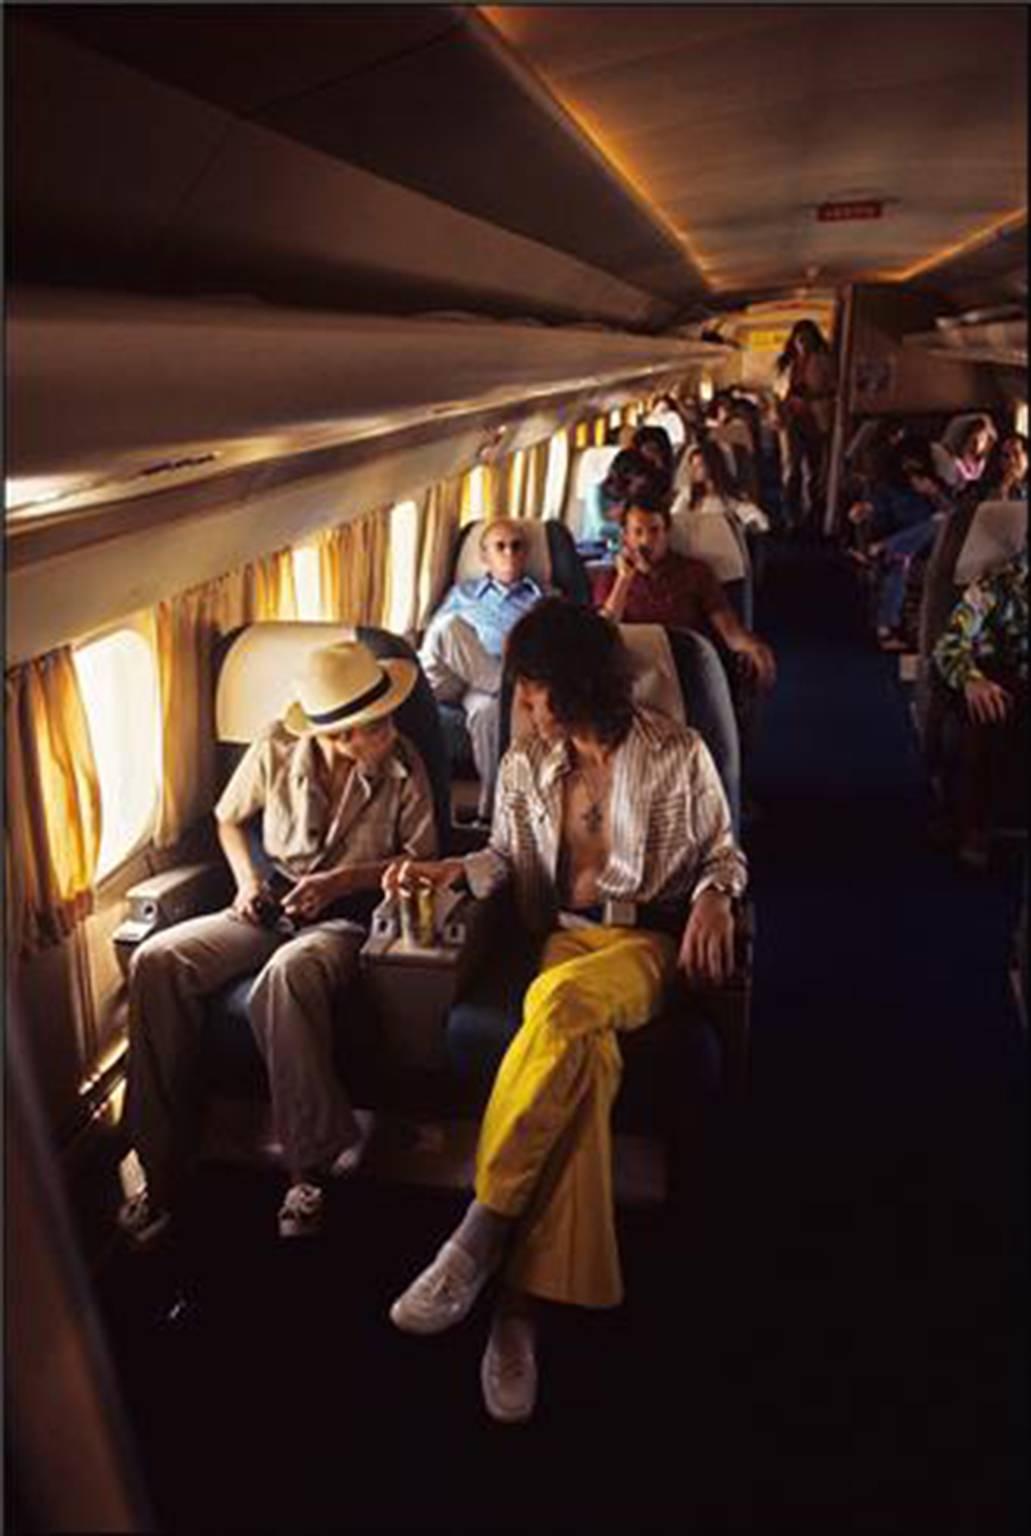 Ethan Russell Color Photograph - On Board the Rolling Stones Plane, 1972